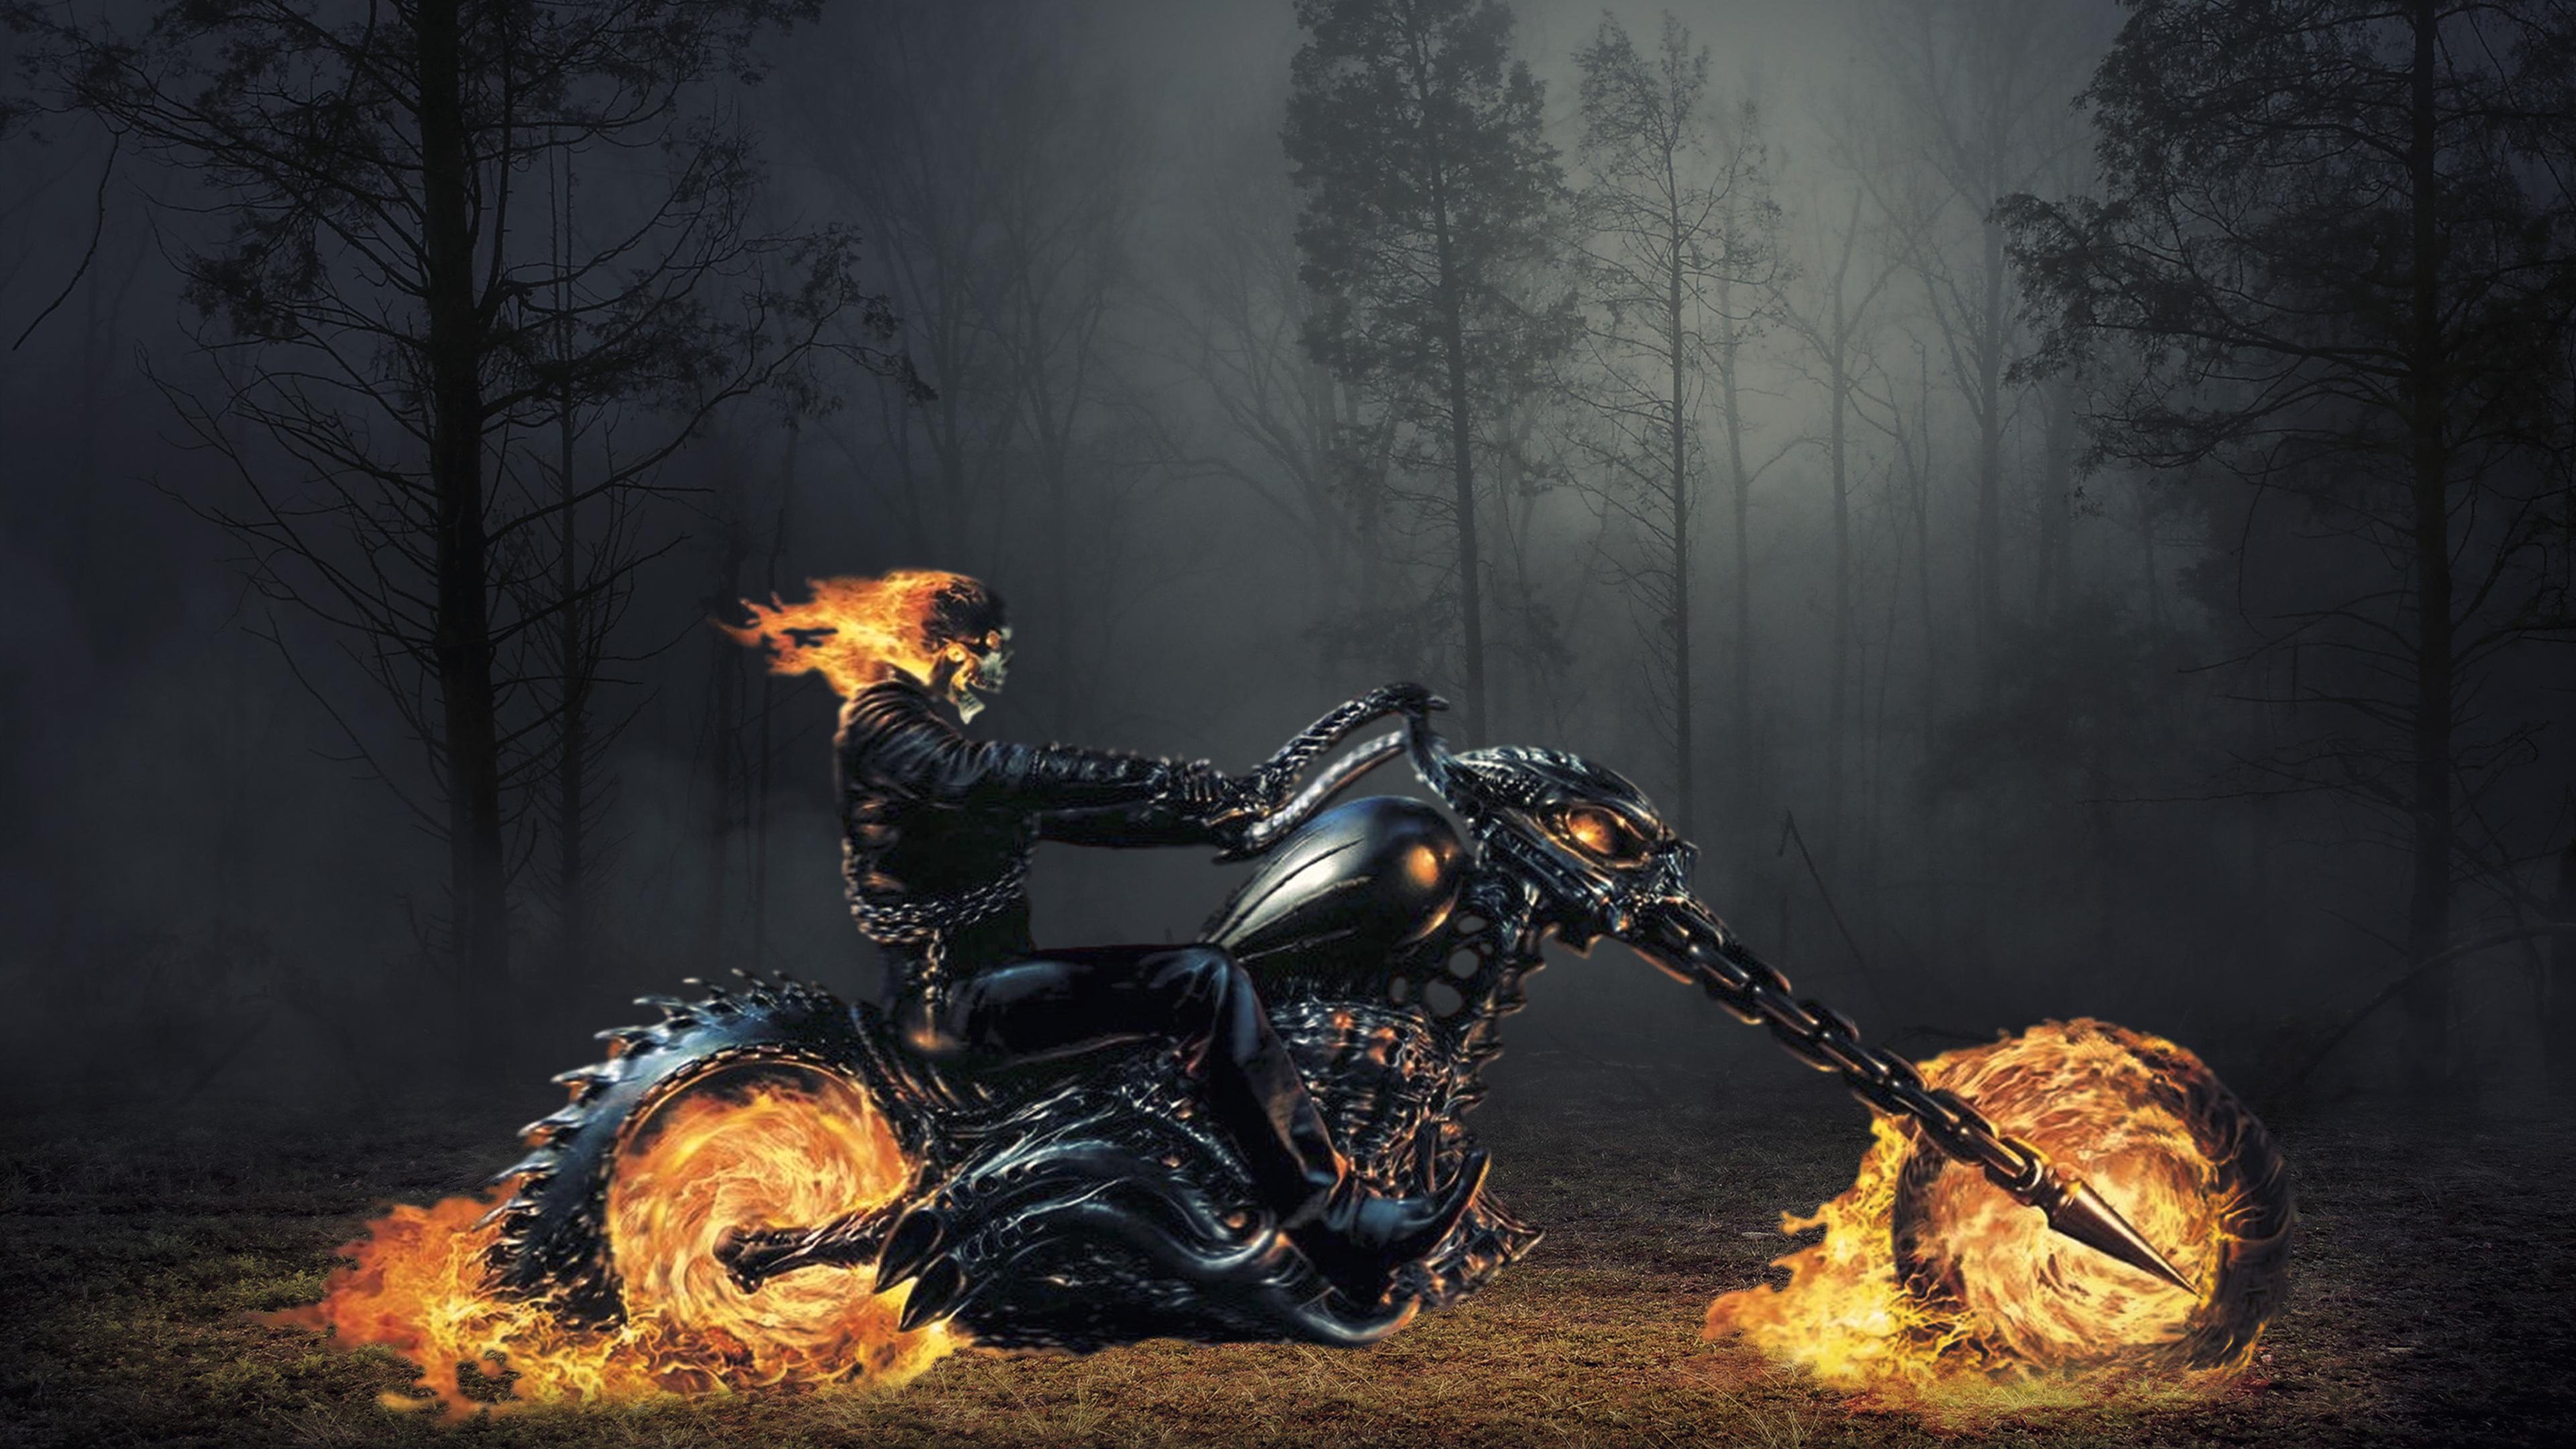 3840 x 2160 · jpeg - 3840x2160 Ghost Rider New 4k HD 4k Wallpapers, Images, Backgrounds ...